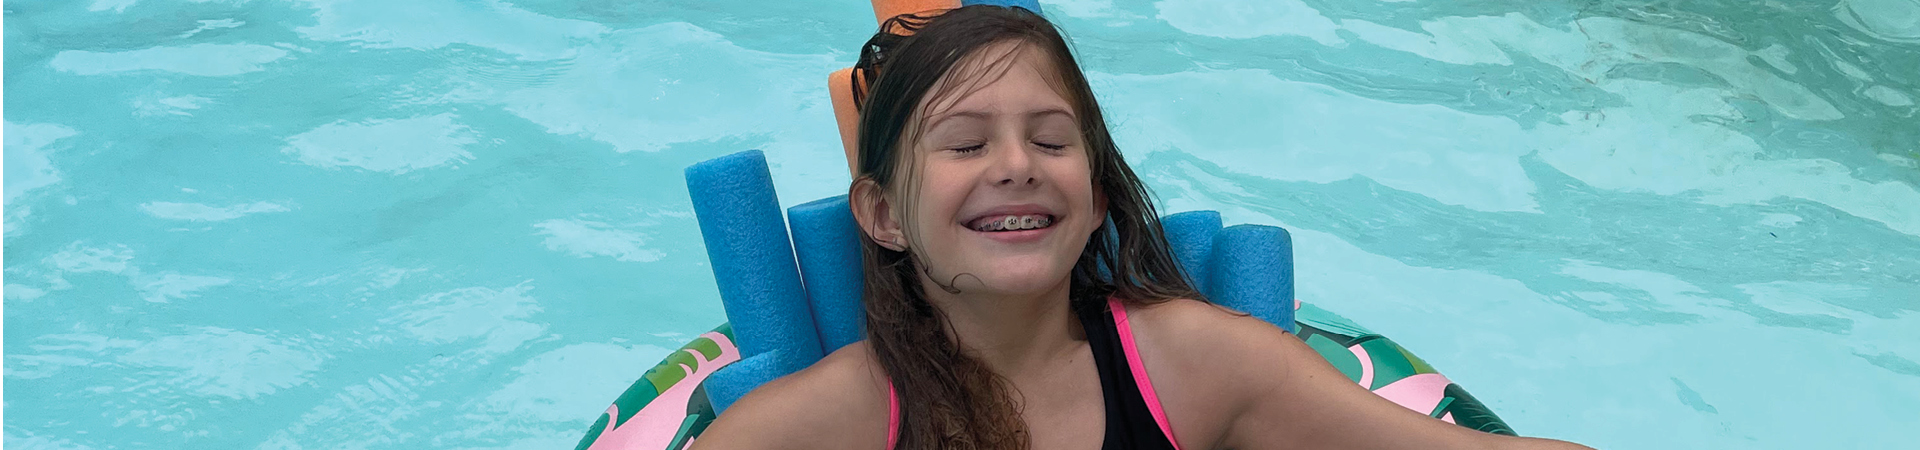  Girl in a pool float smiling 